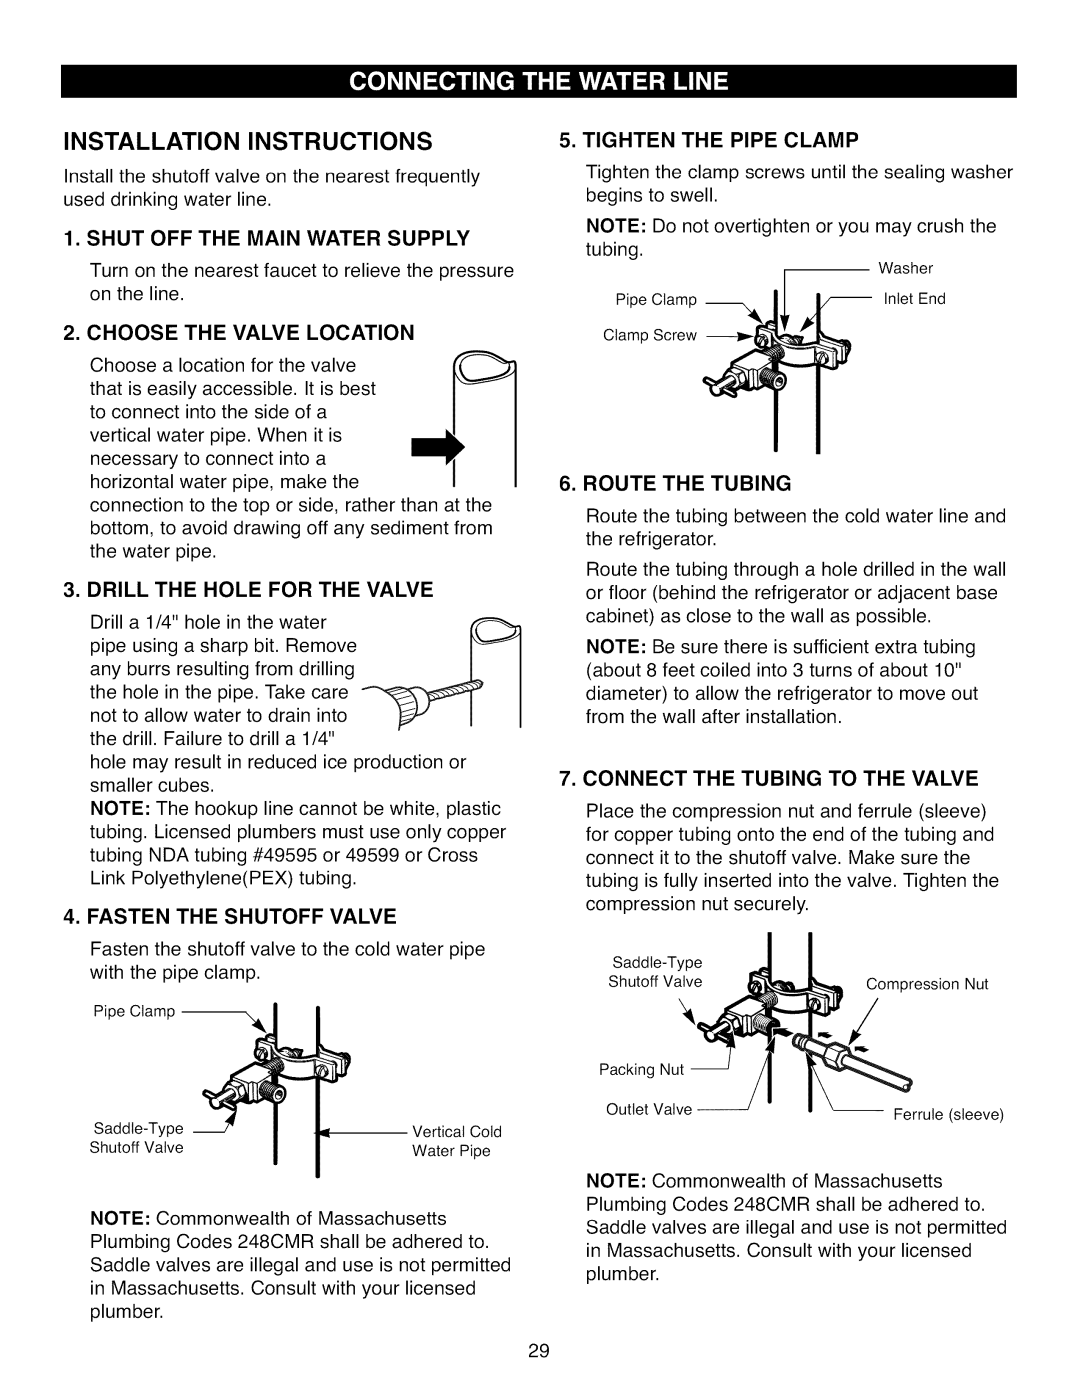 Kenmore 795.7104 manual Installation Instructions, Choose The Valve Location, Route, Drill The Hole For The Valve 